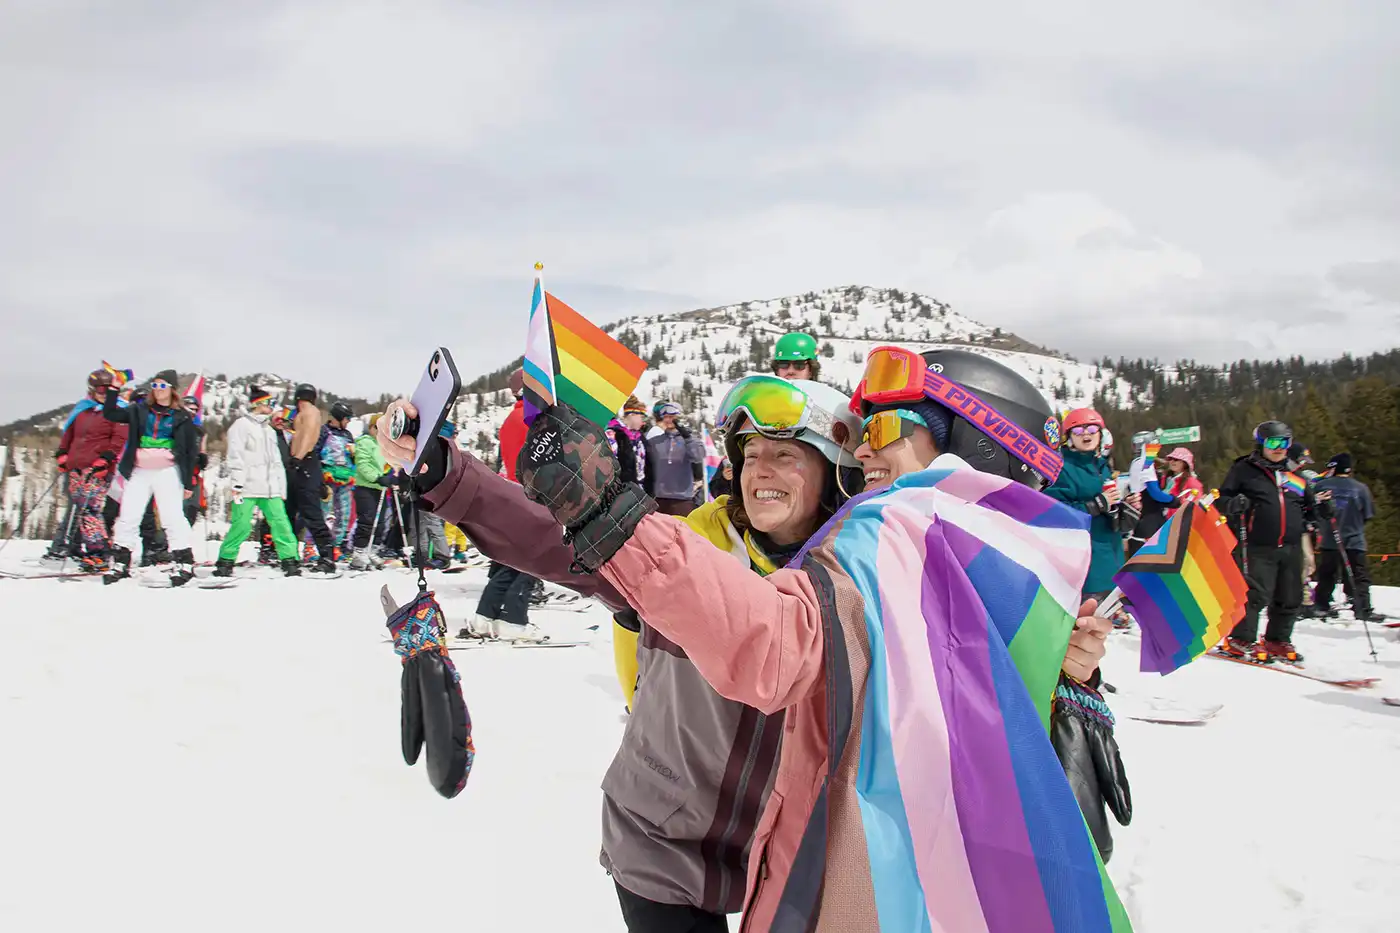 Two women (C Meyer and Michelle Anklan) stand bundled up in winter weather taking a selfie together. They are draped in pride flags. Behind them is a crowd of snow sports enthusiasts.